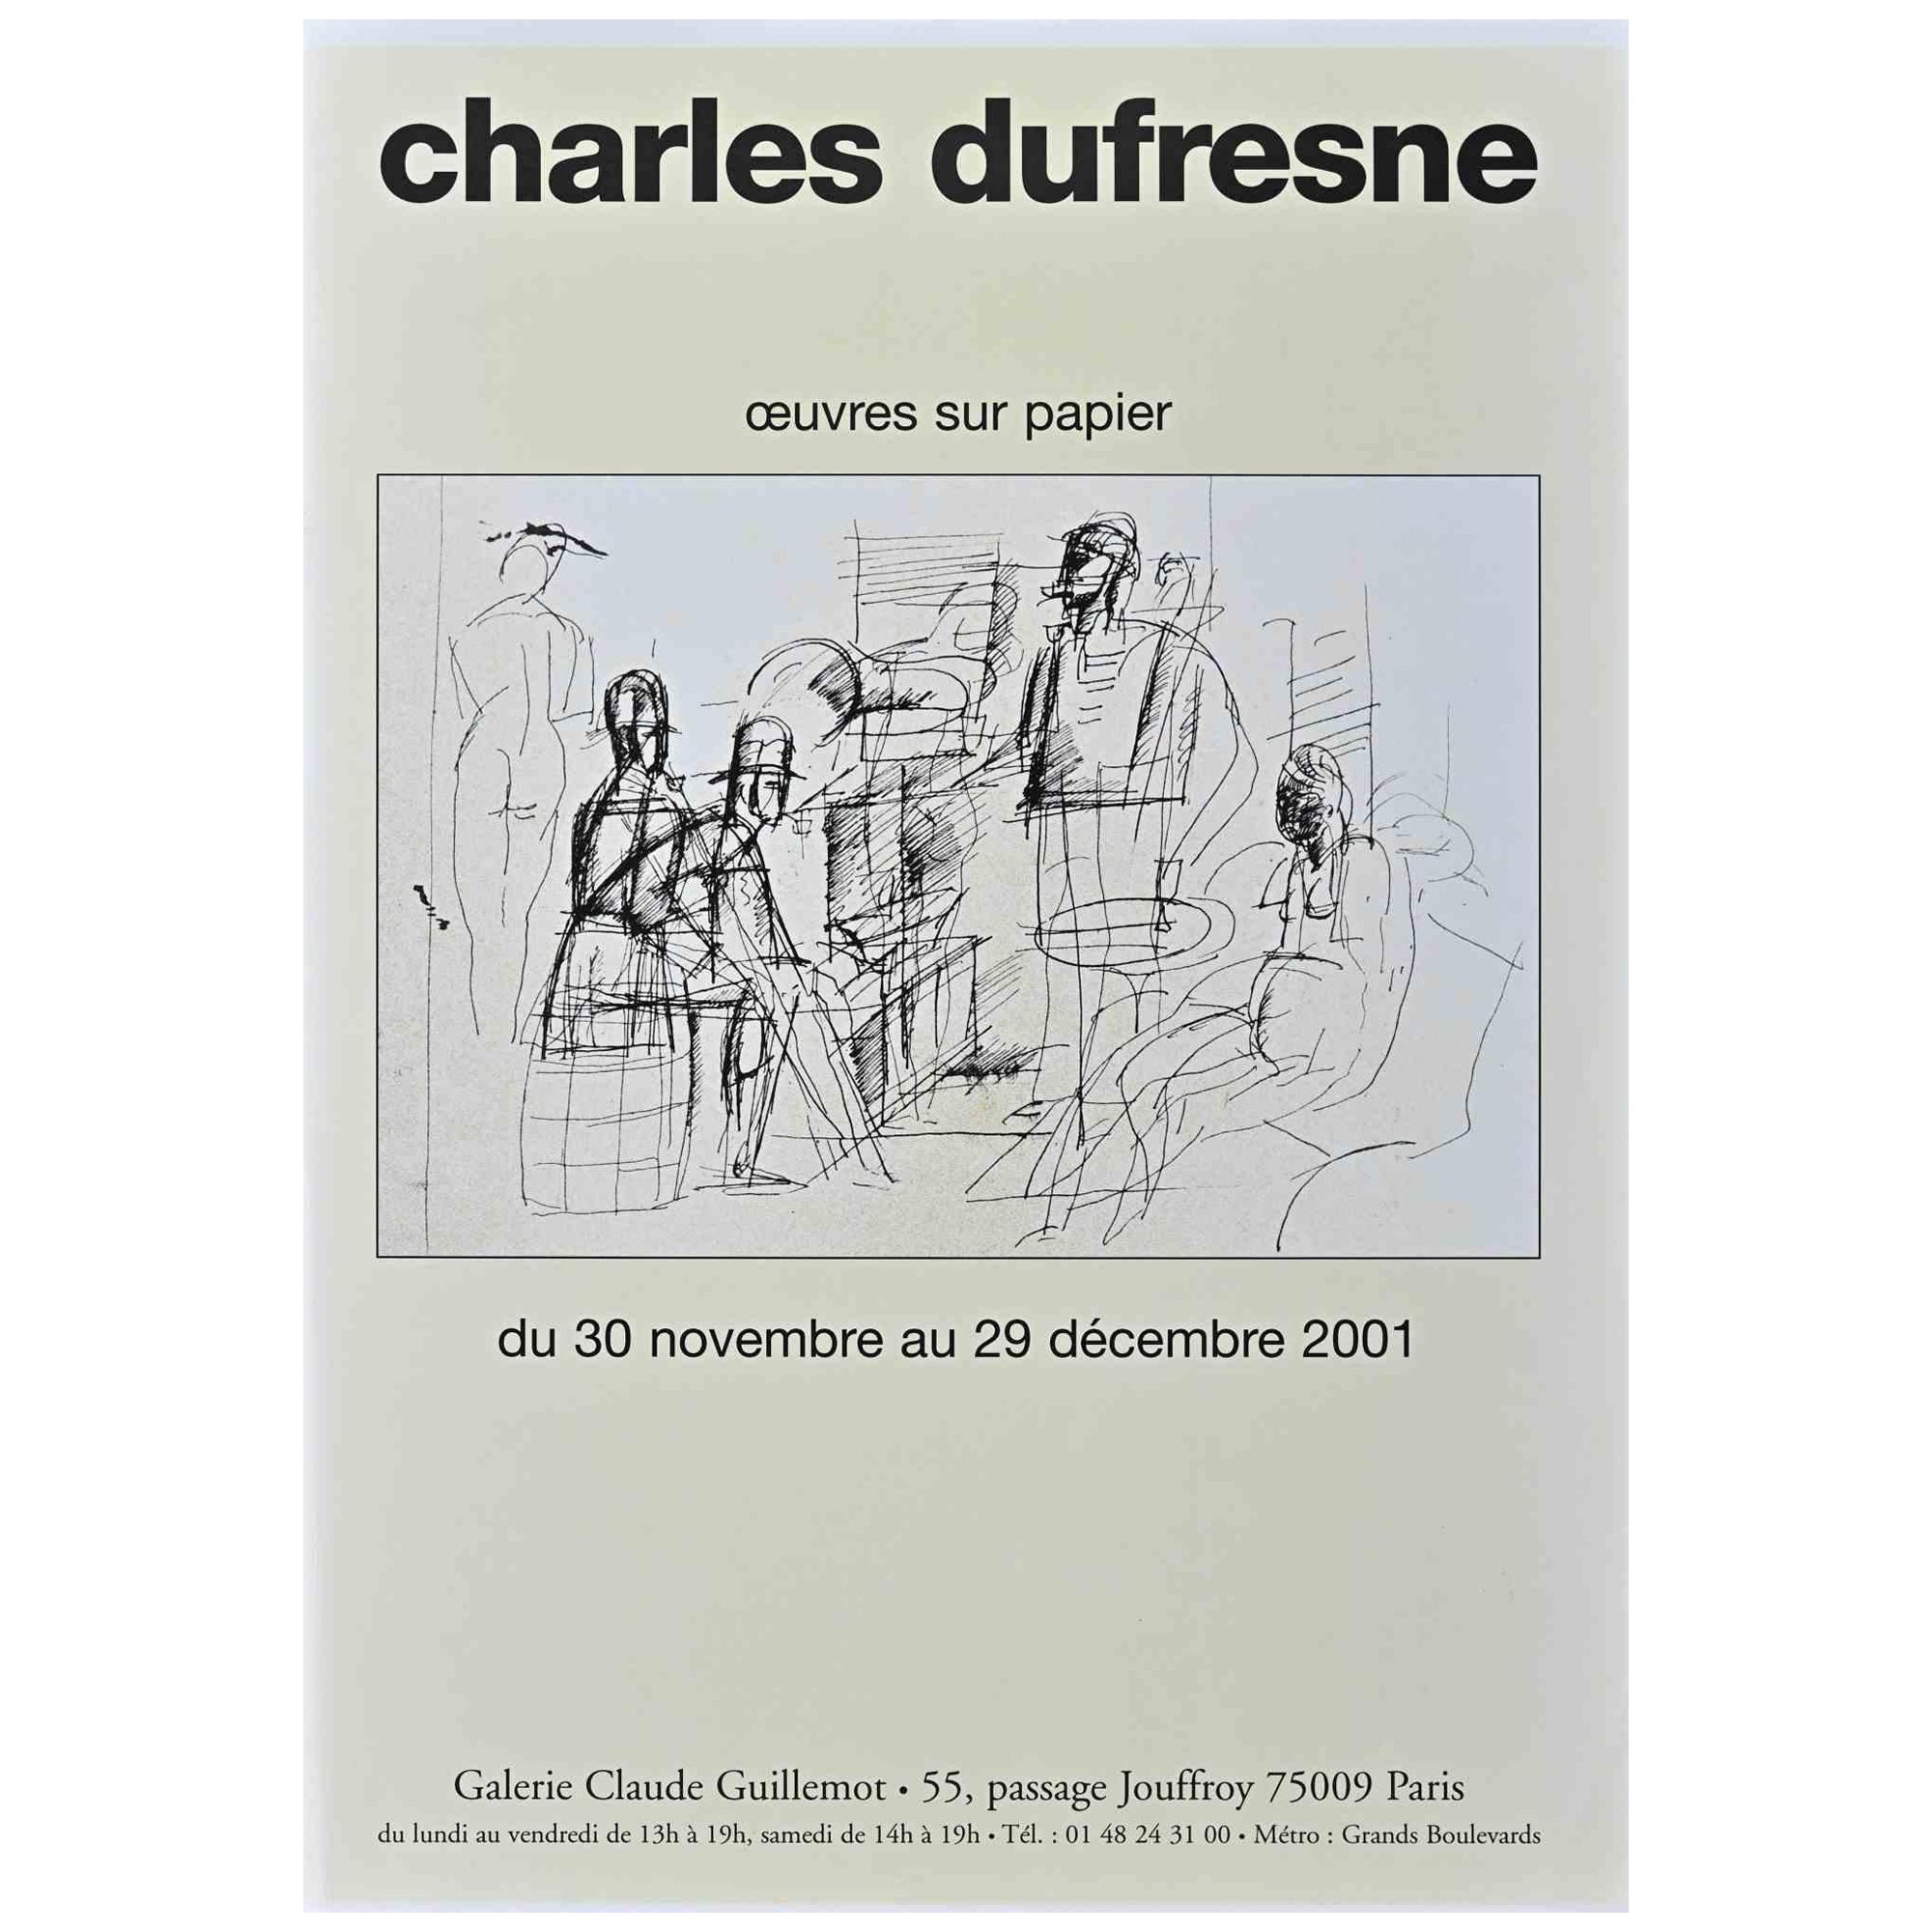 Oeuvres Sur Papier - Vintage Offset Poster after Charles Dufresne - 2001